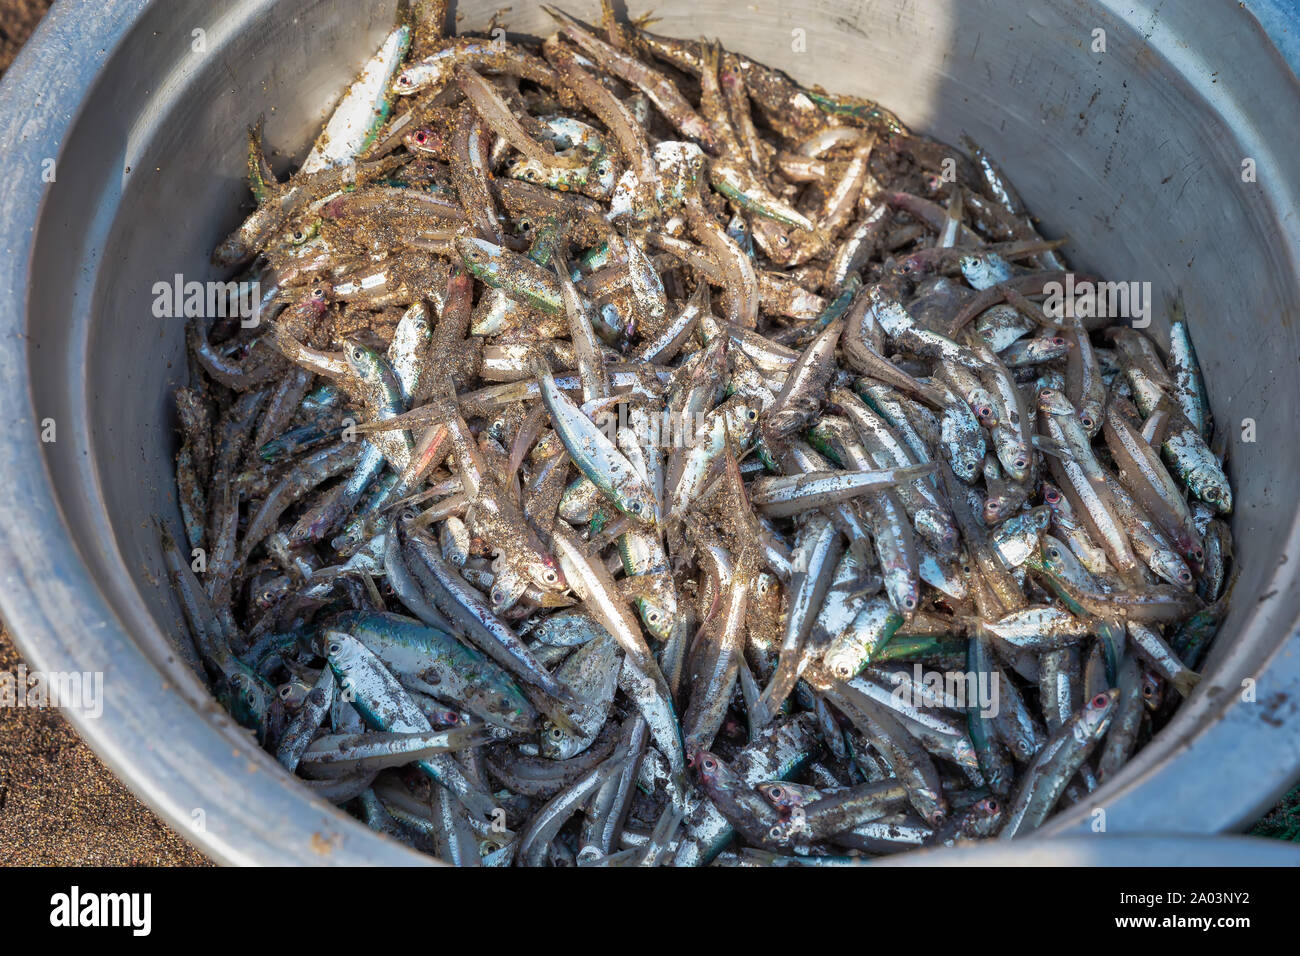 Anchovy fish on silver basin Stock Photo